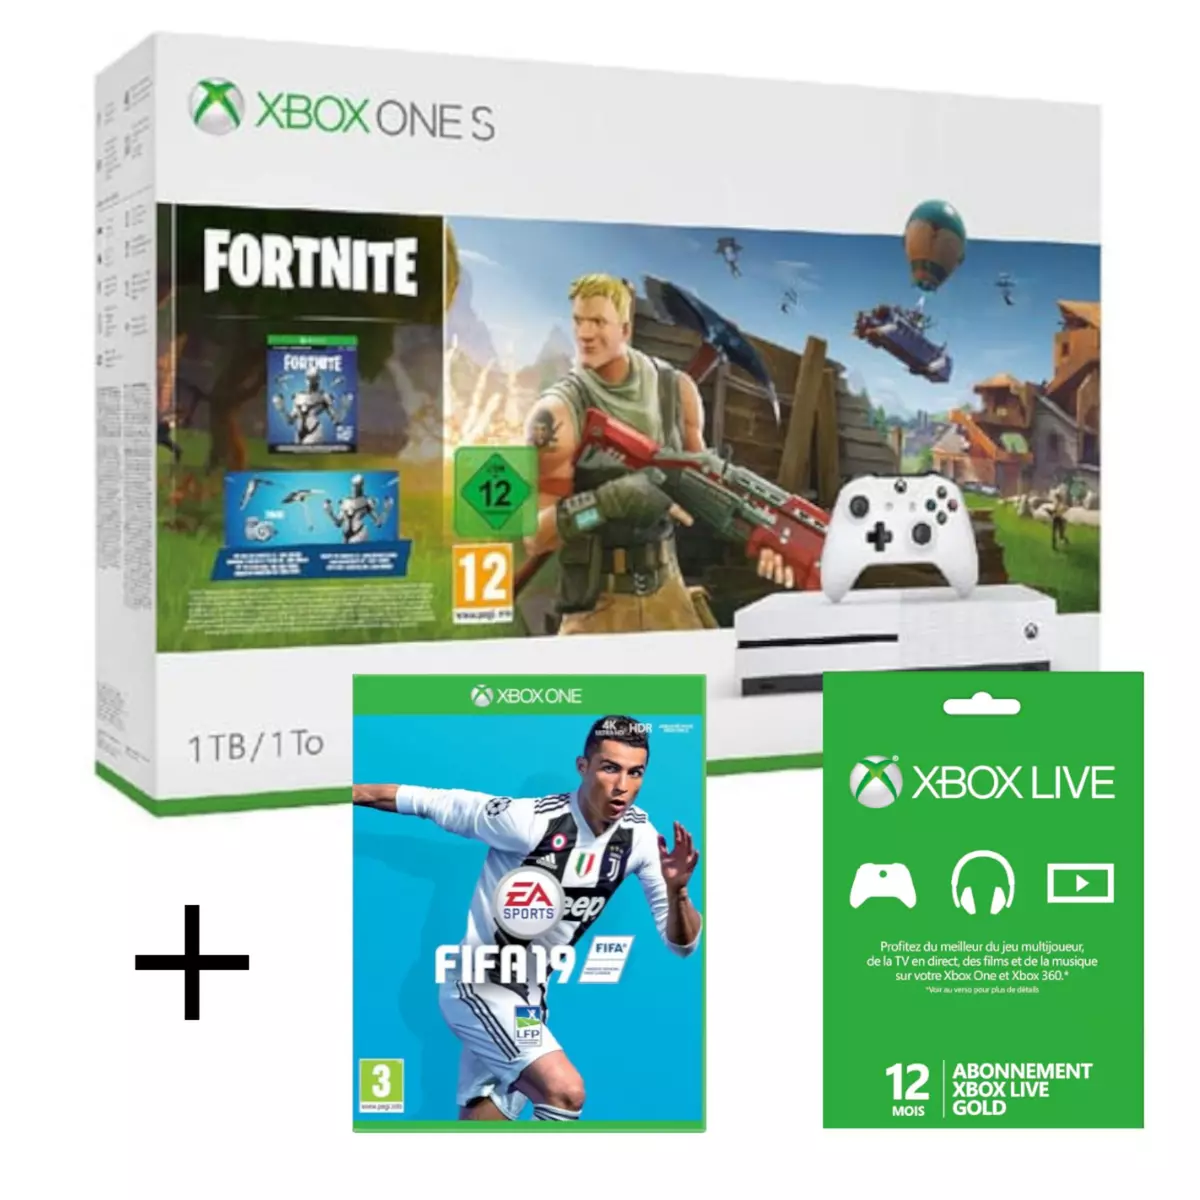 Console Xbox One S Fortnite + FIFA 19 + Abonnement Live 1 an